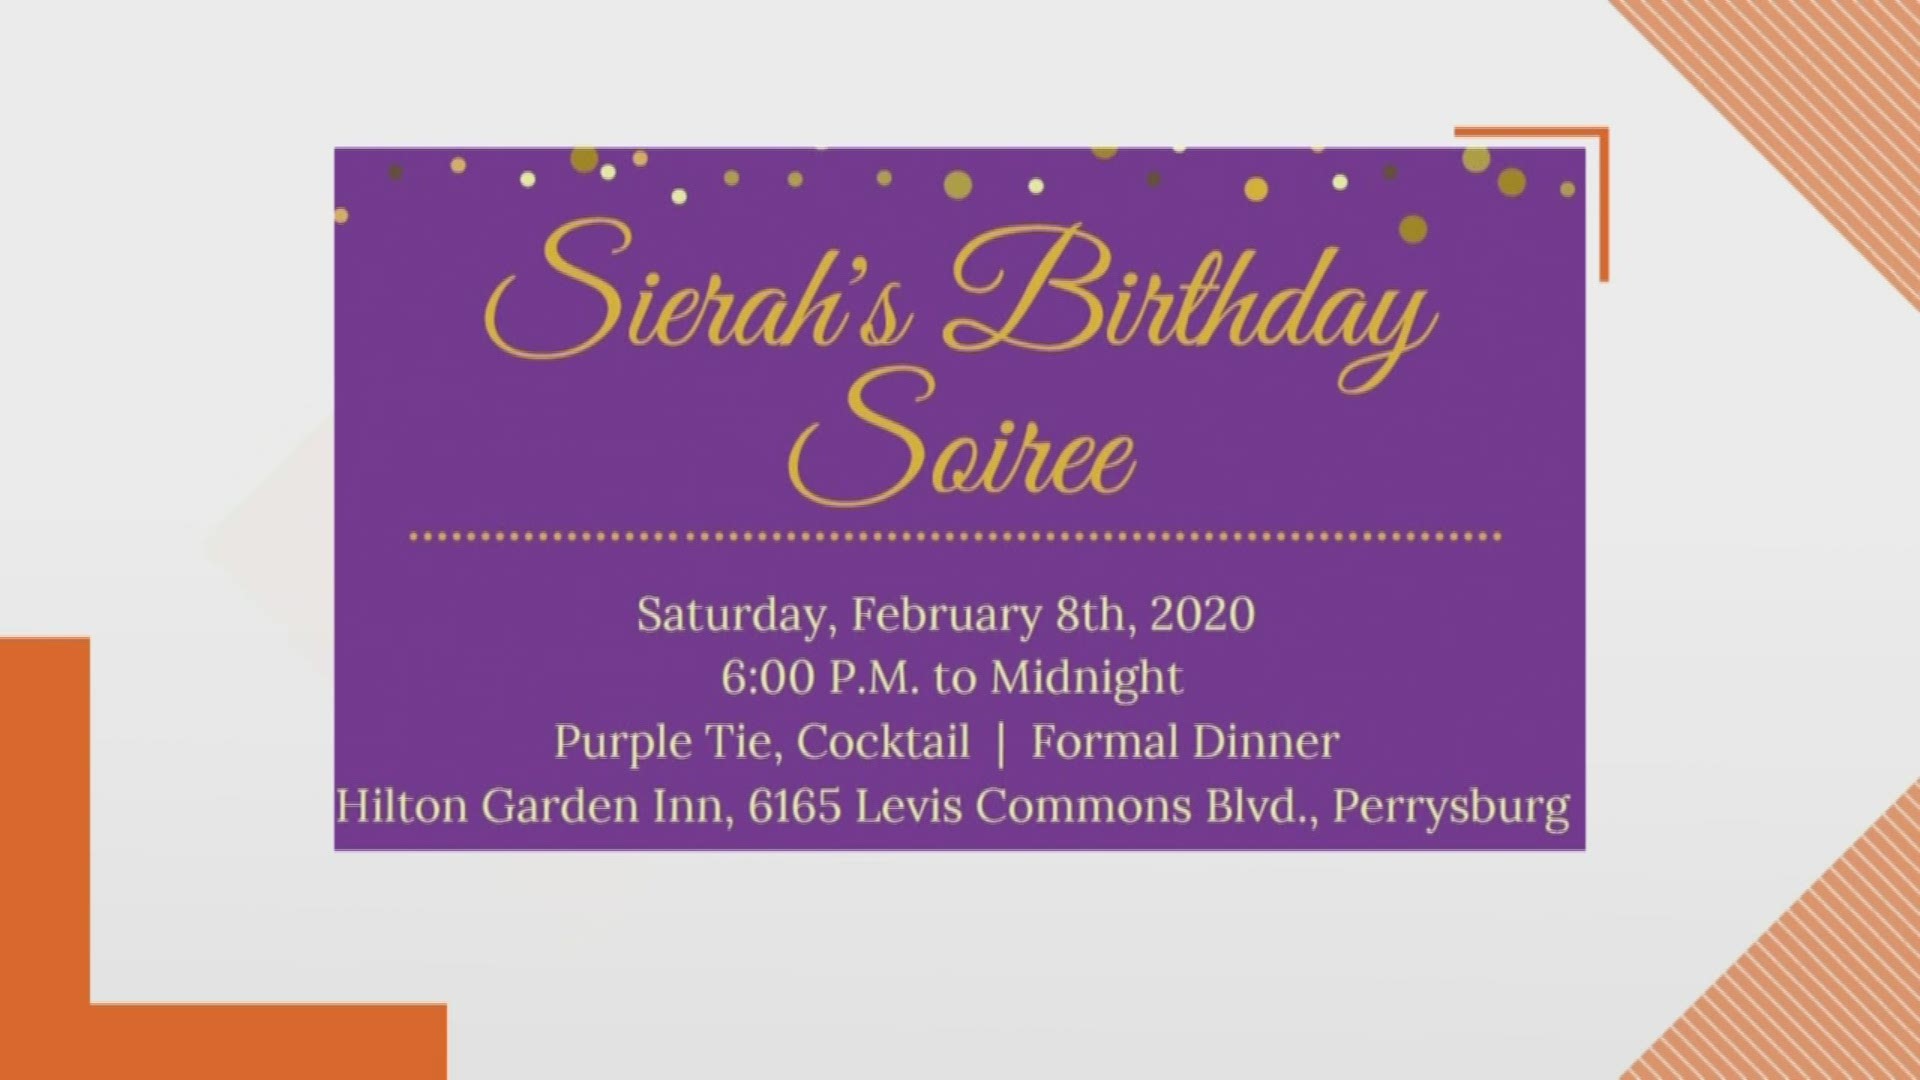 Protecting our kids and getting laws changed, you can help do both and honor Sierah Joughin at the same time with Sierah's Birthday Soiree.